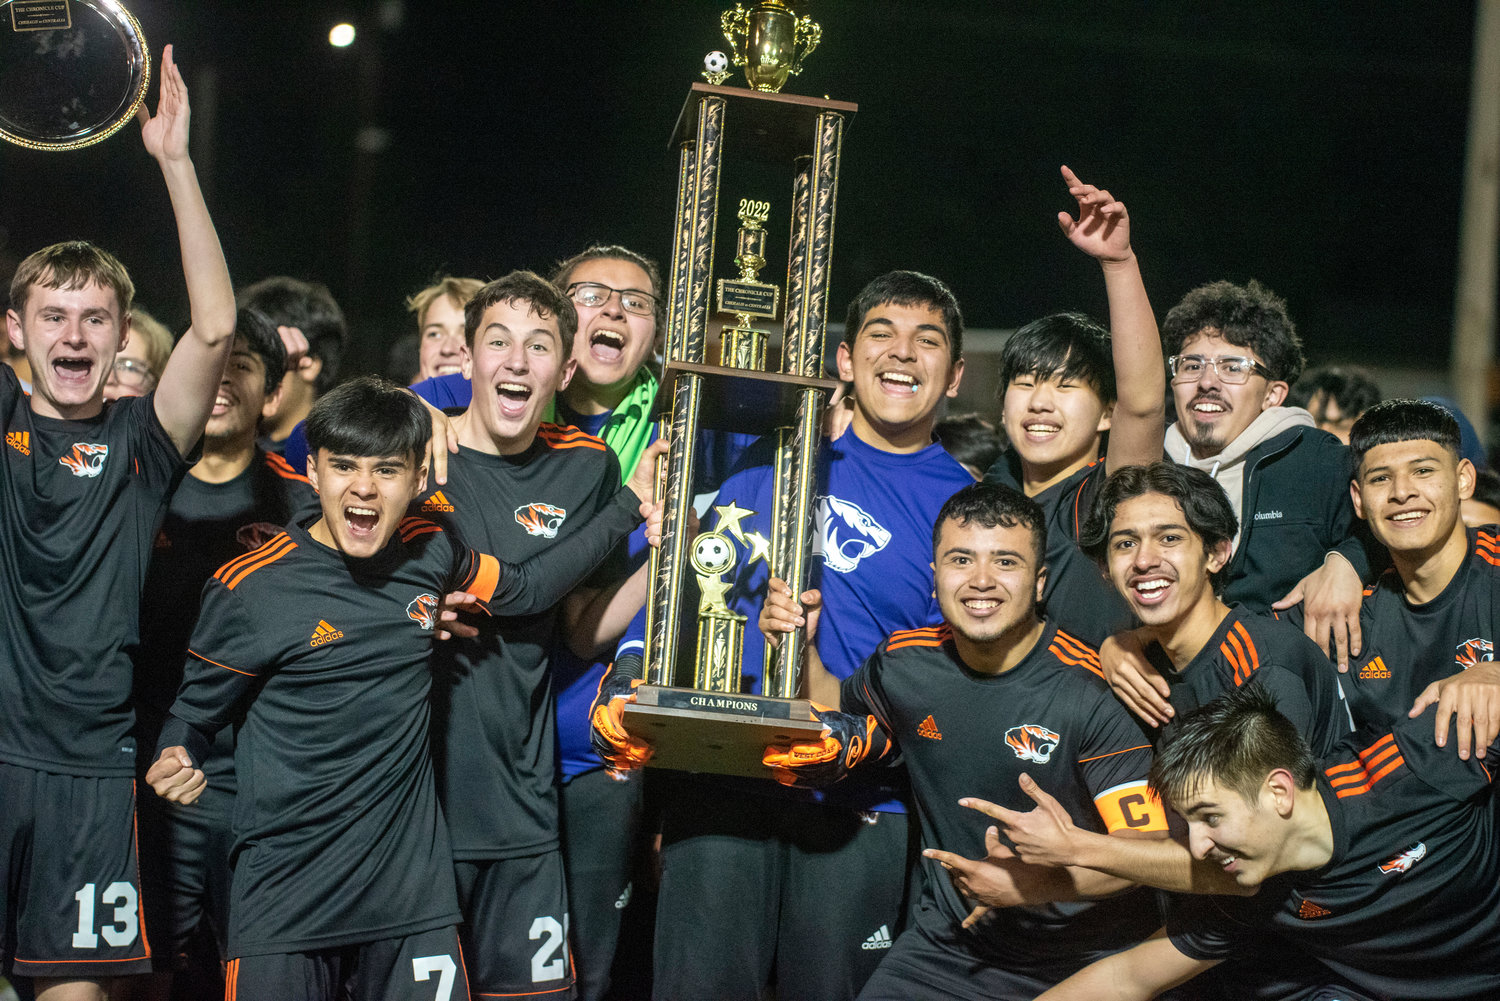 Centralia soccer players hoist The Chronicle Cup trophy after defeating W.F. West in PKs twice on Friday at Tiger Stadium.